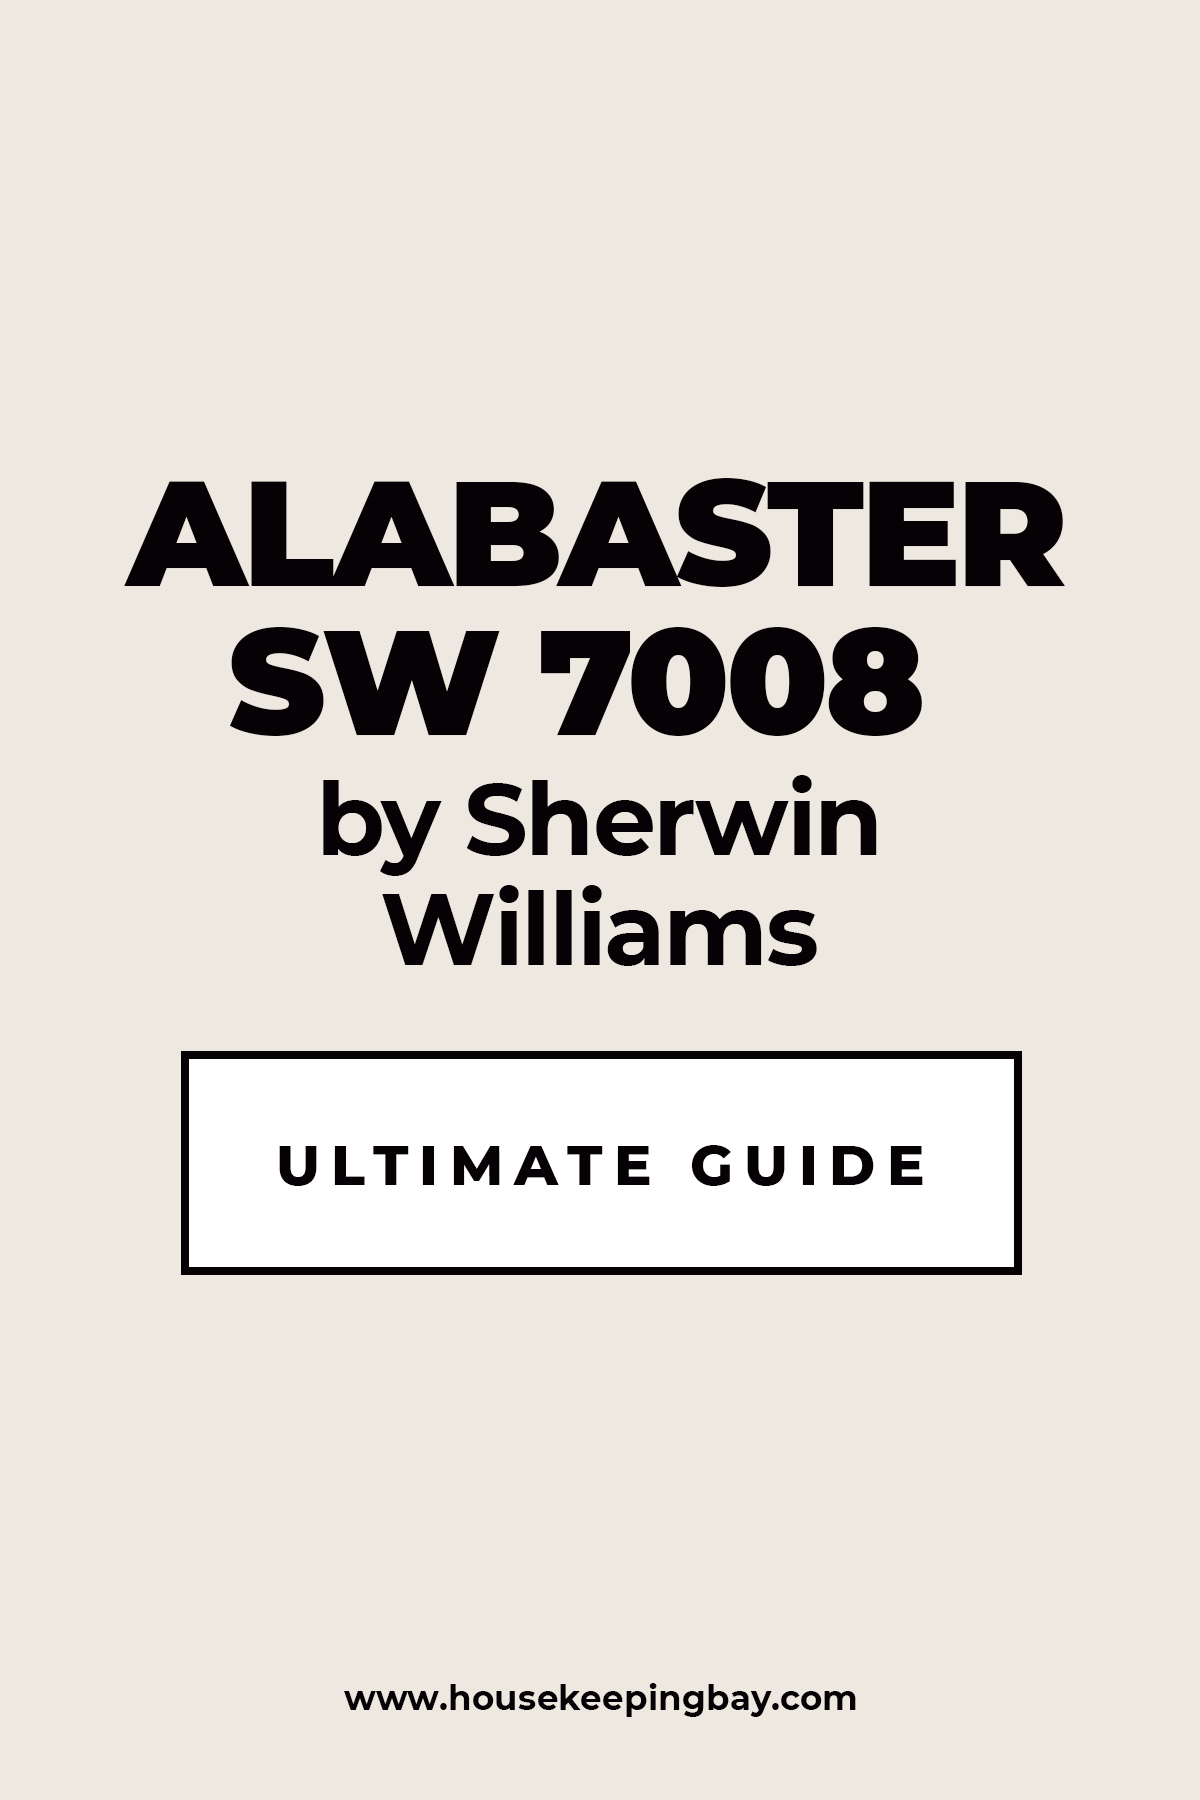 Alabaster SW 7008 by Sherwin Williams Ultimate Guide